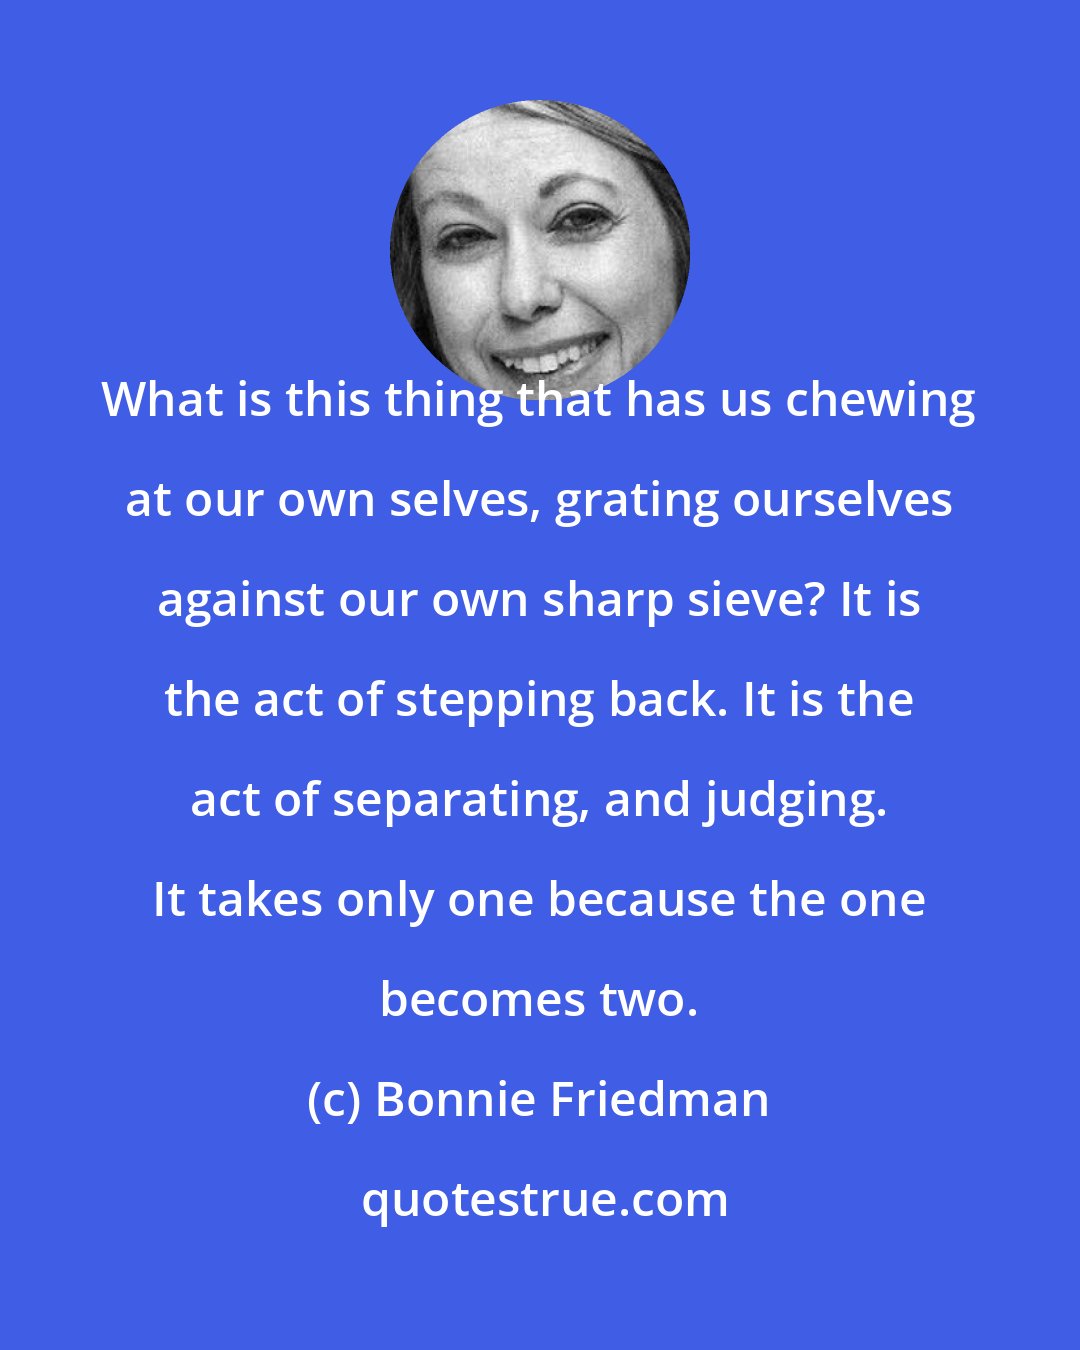 Bonnie Friedman: What is this thing that has us chewing at our own selves, grating ourselves against our own sharp sieve? It is the act of stepping back. It is the act of separating, and judging. It takes only one because the one becomes two.